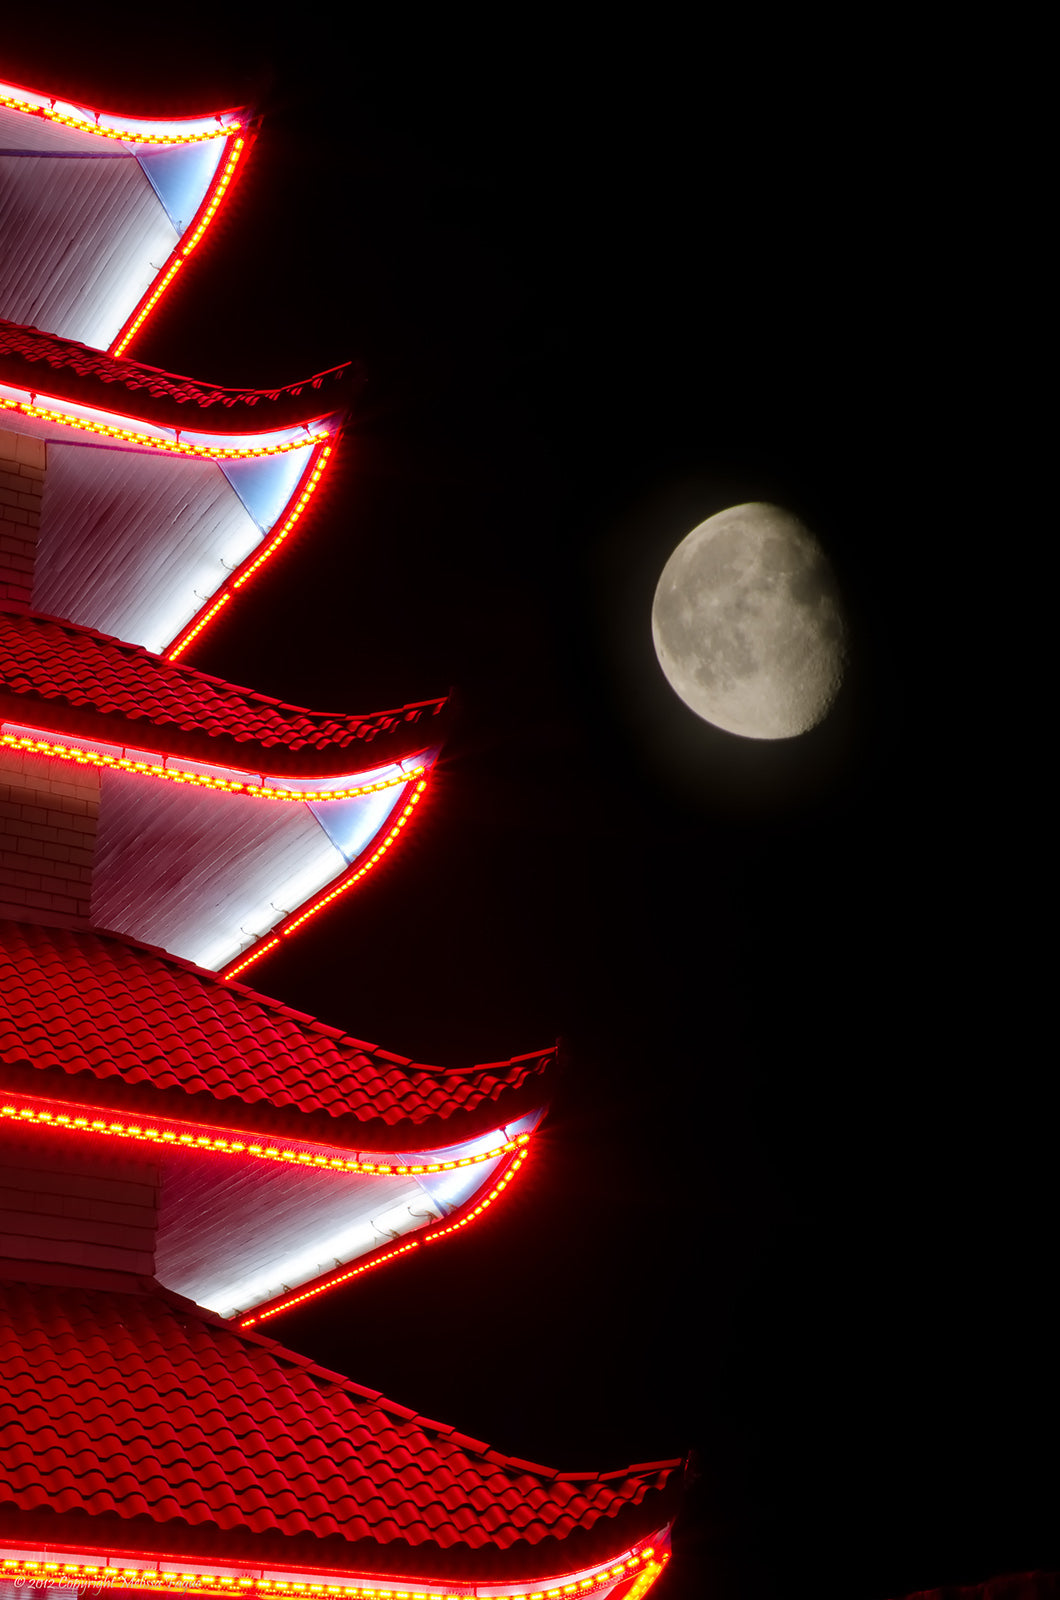 Moon over Pagoda 1 Urban Night Landscape Photo DIY Wall Decor Instant Download Print - Printable  - PIPAFINEART